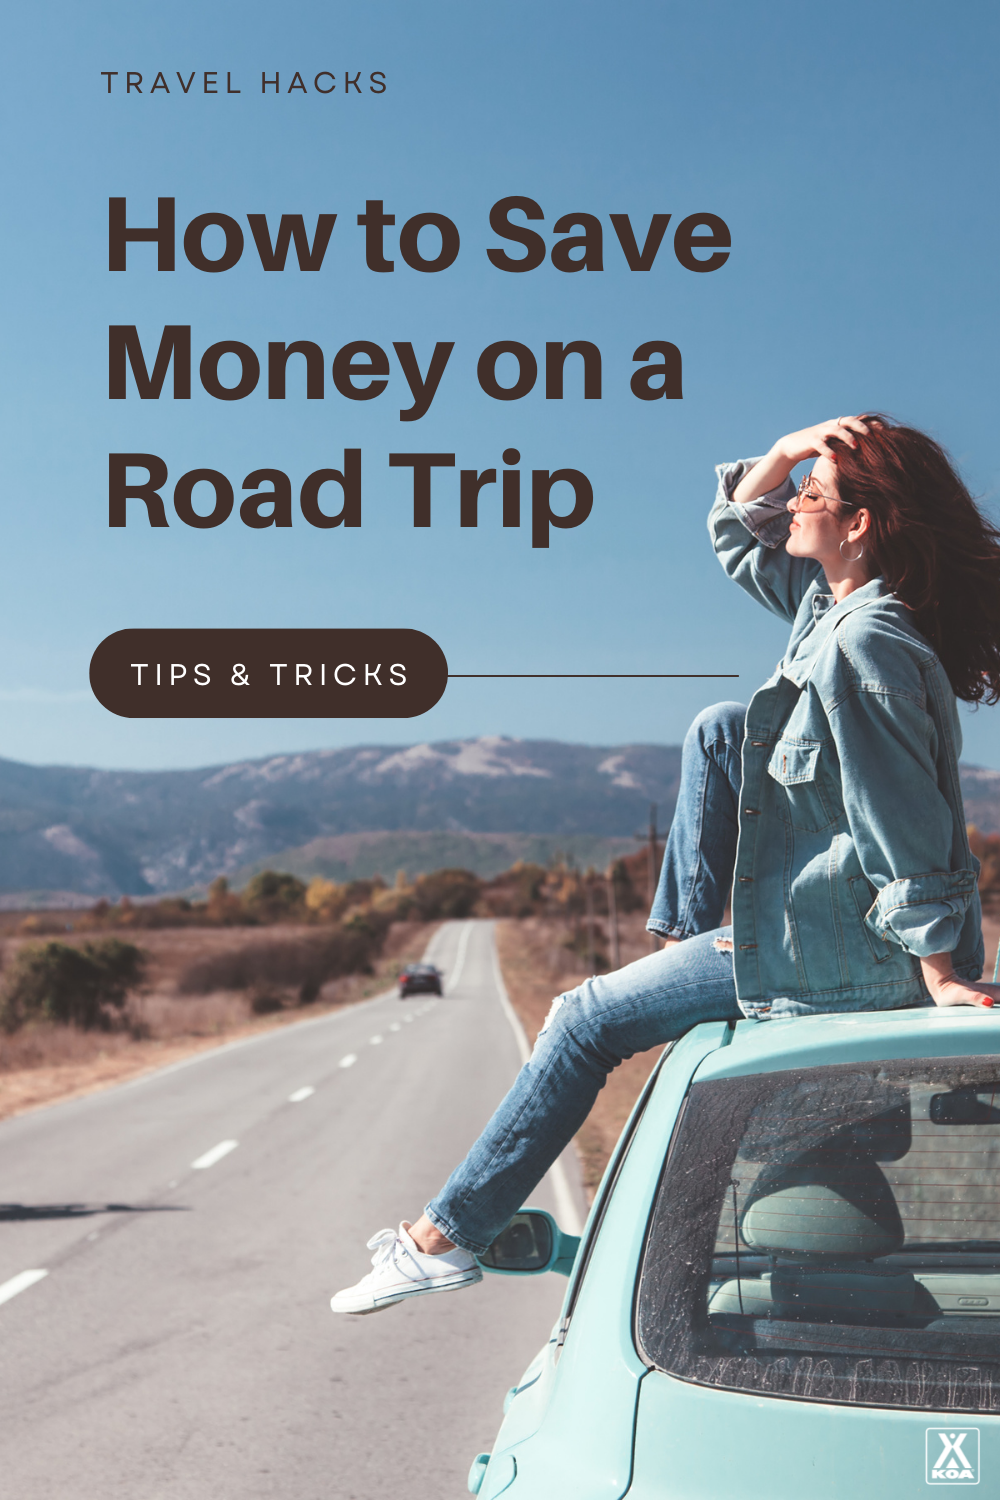 If you want to save money on a road trip, this is an affordable travel guide for you. Check out KOA Rewards for even more savings, perks and benefits!